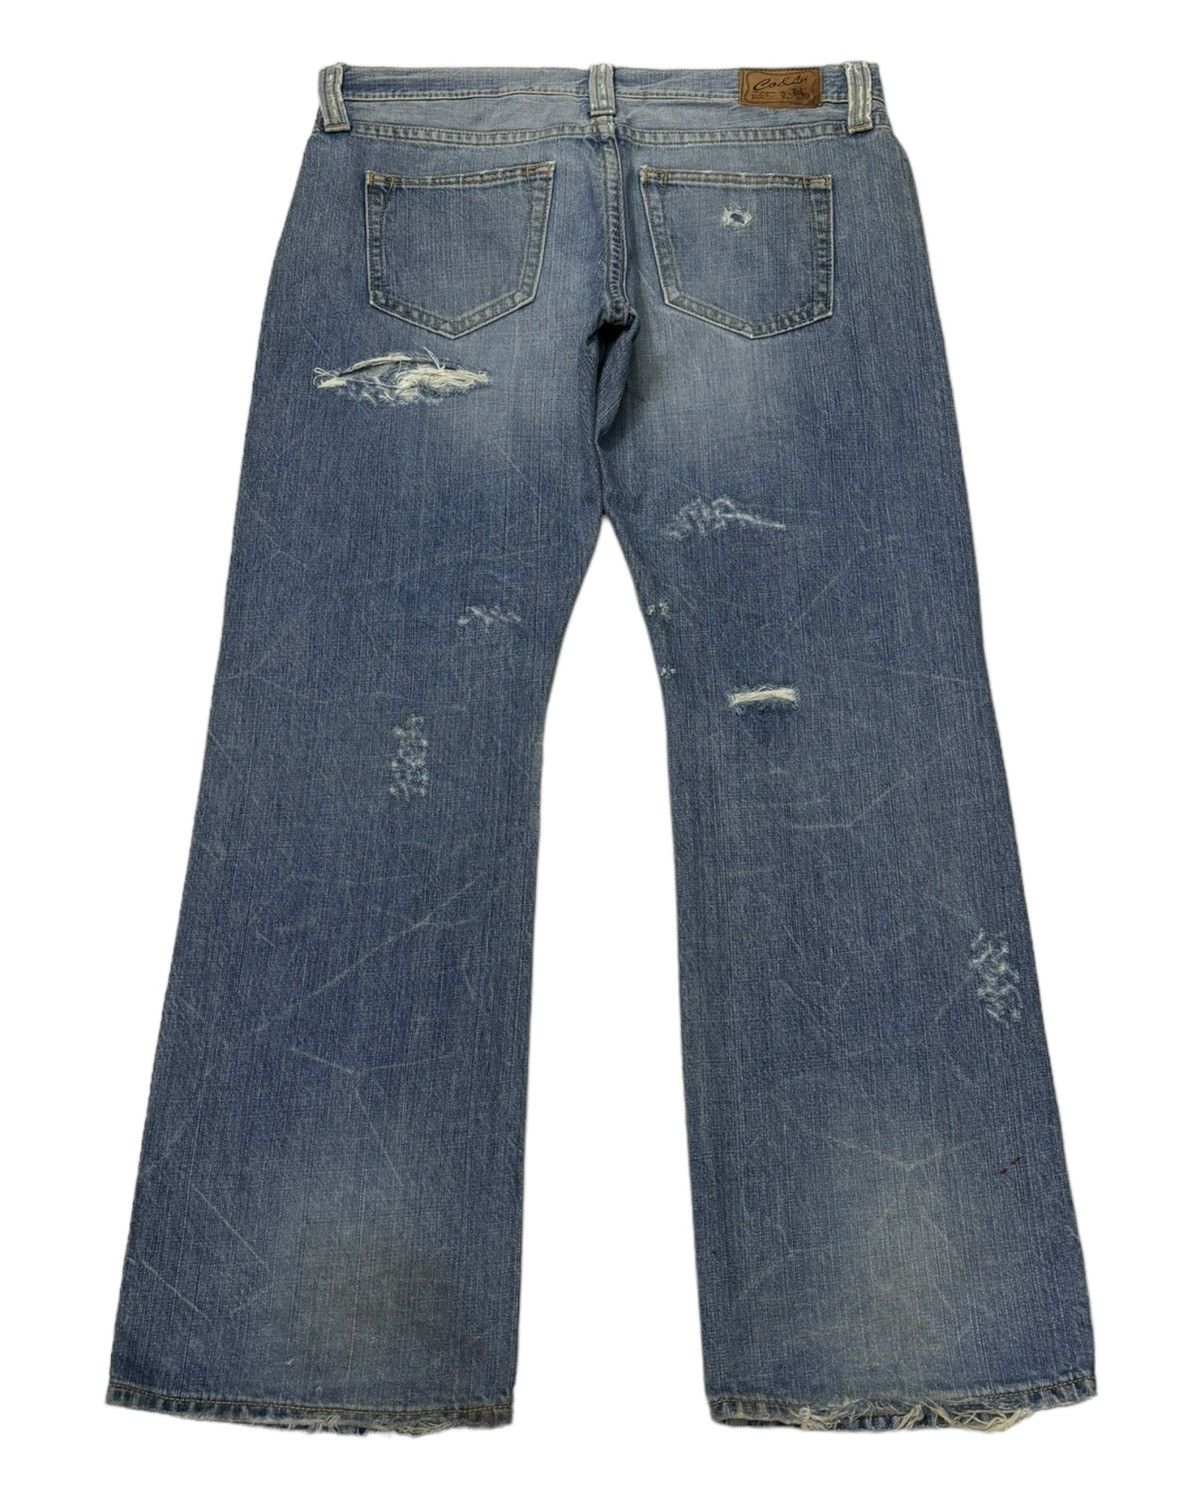 Archival Clothing - VINTAGE CO&LU THRASHED DISTRESS RIPS BAGGY FLARE JEANS - 2